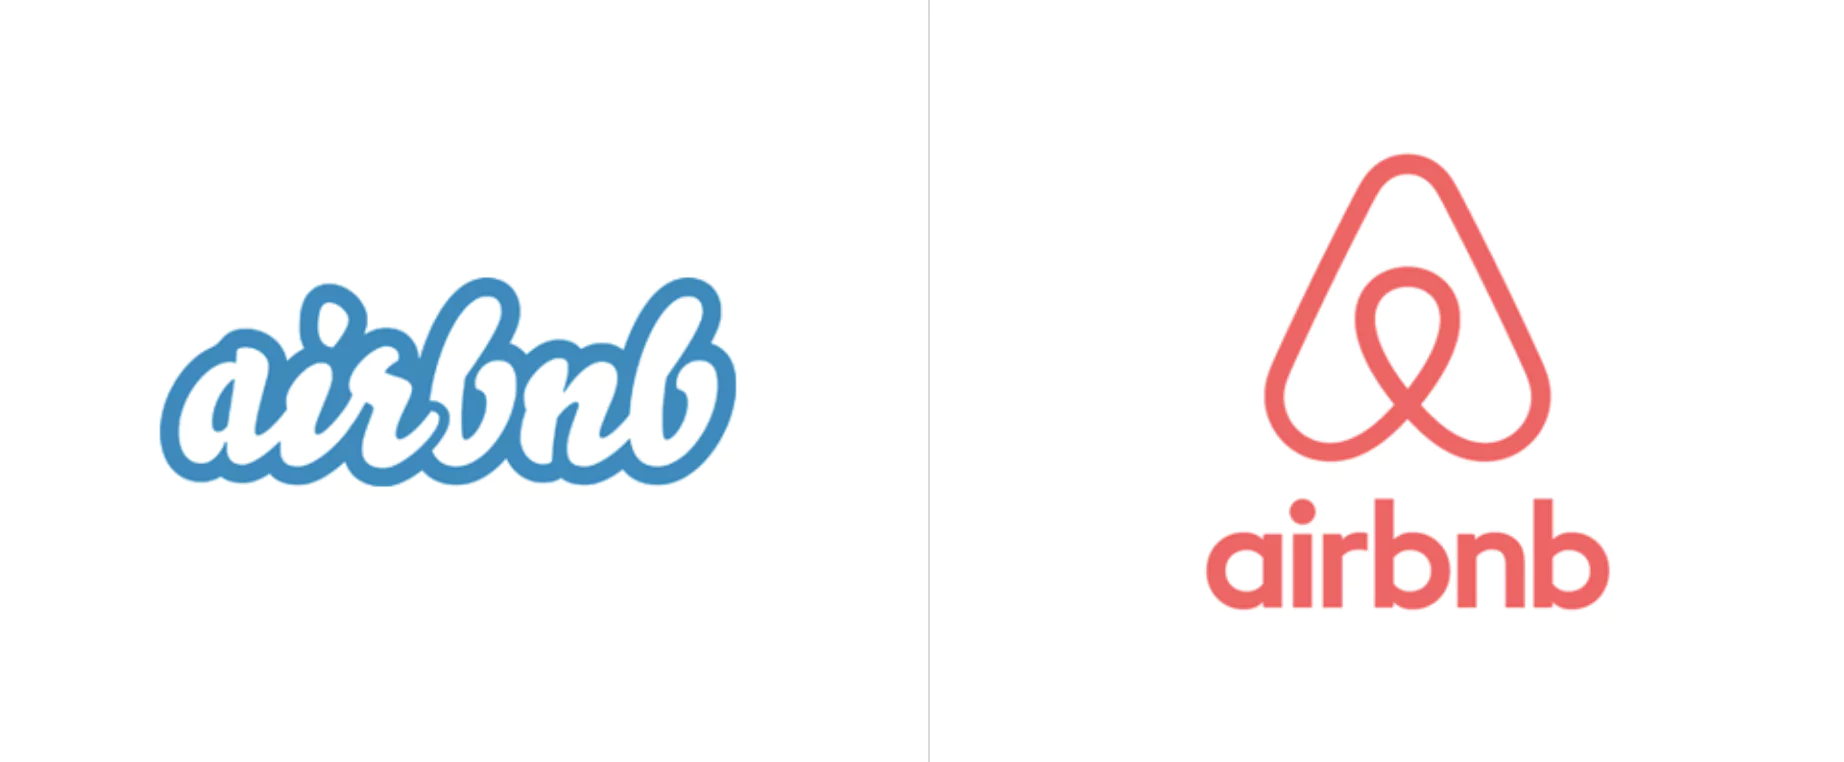 Airbnb logo comparison: old white/blue logo on the left, new pink/red logo on the right with a heart-house symbol